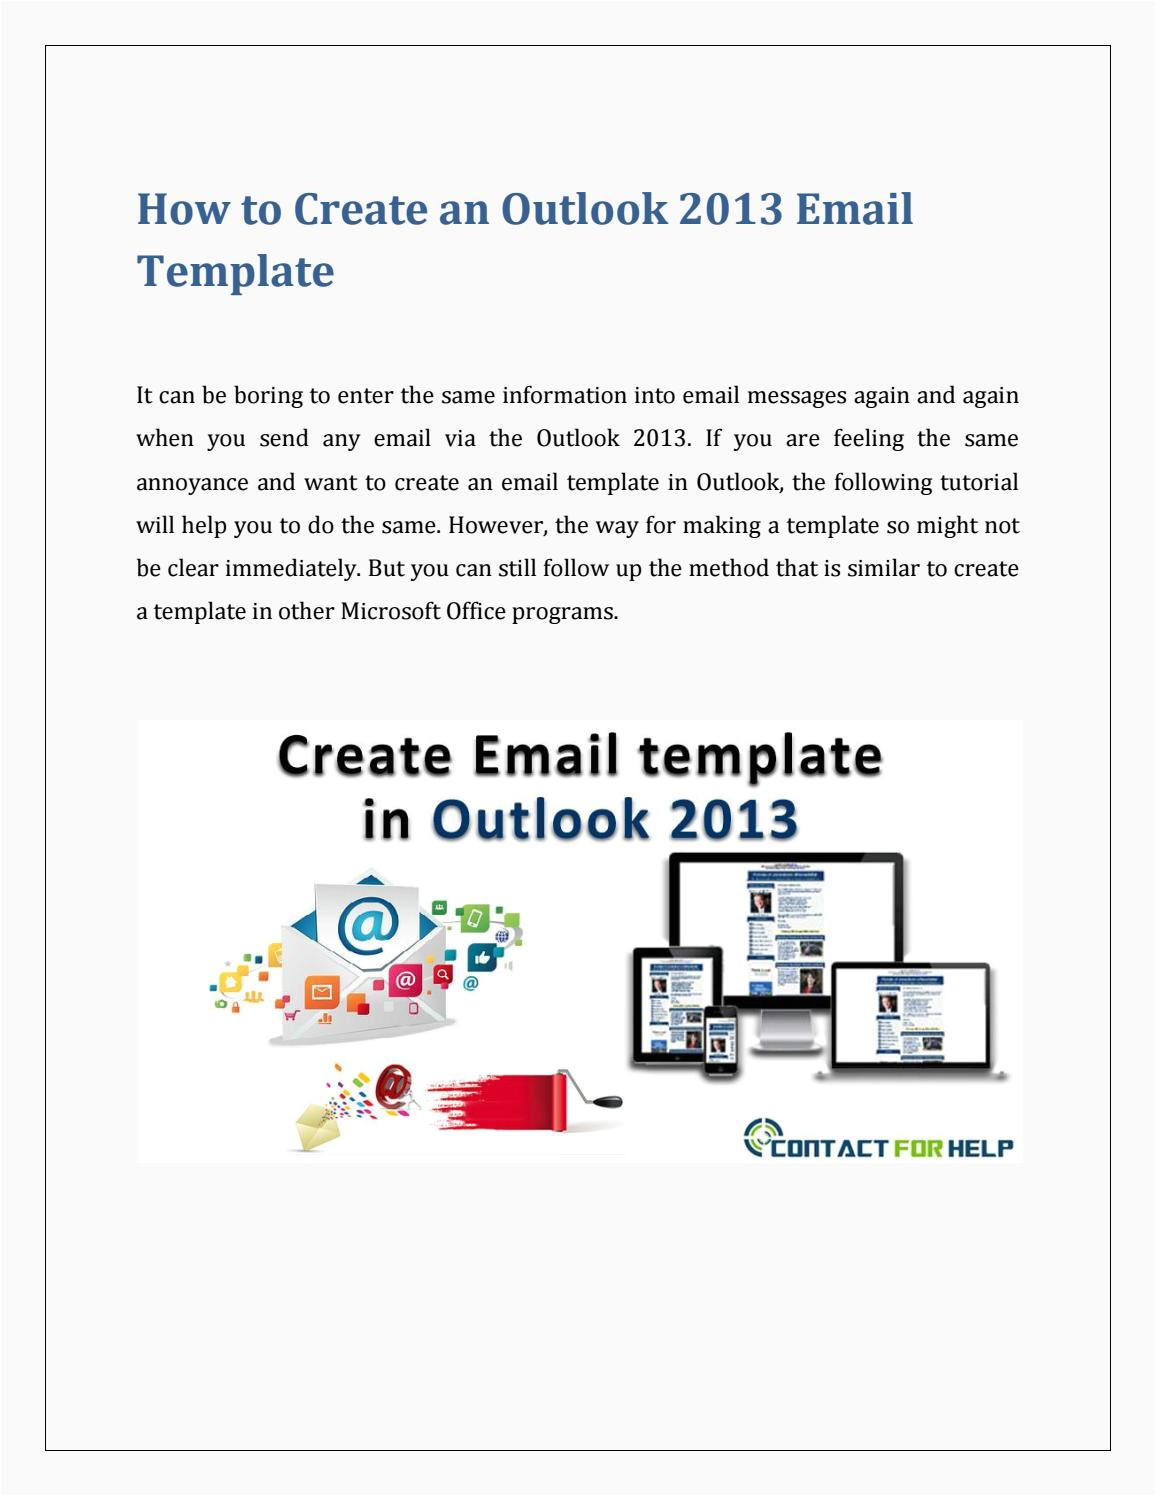 create an email template in outlook